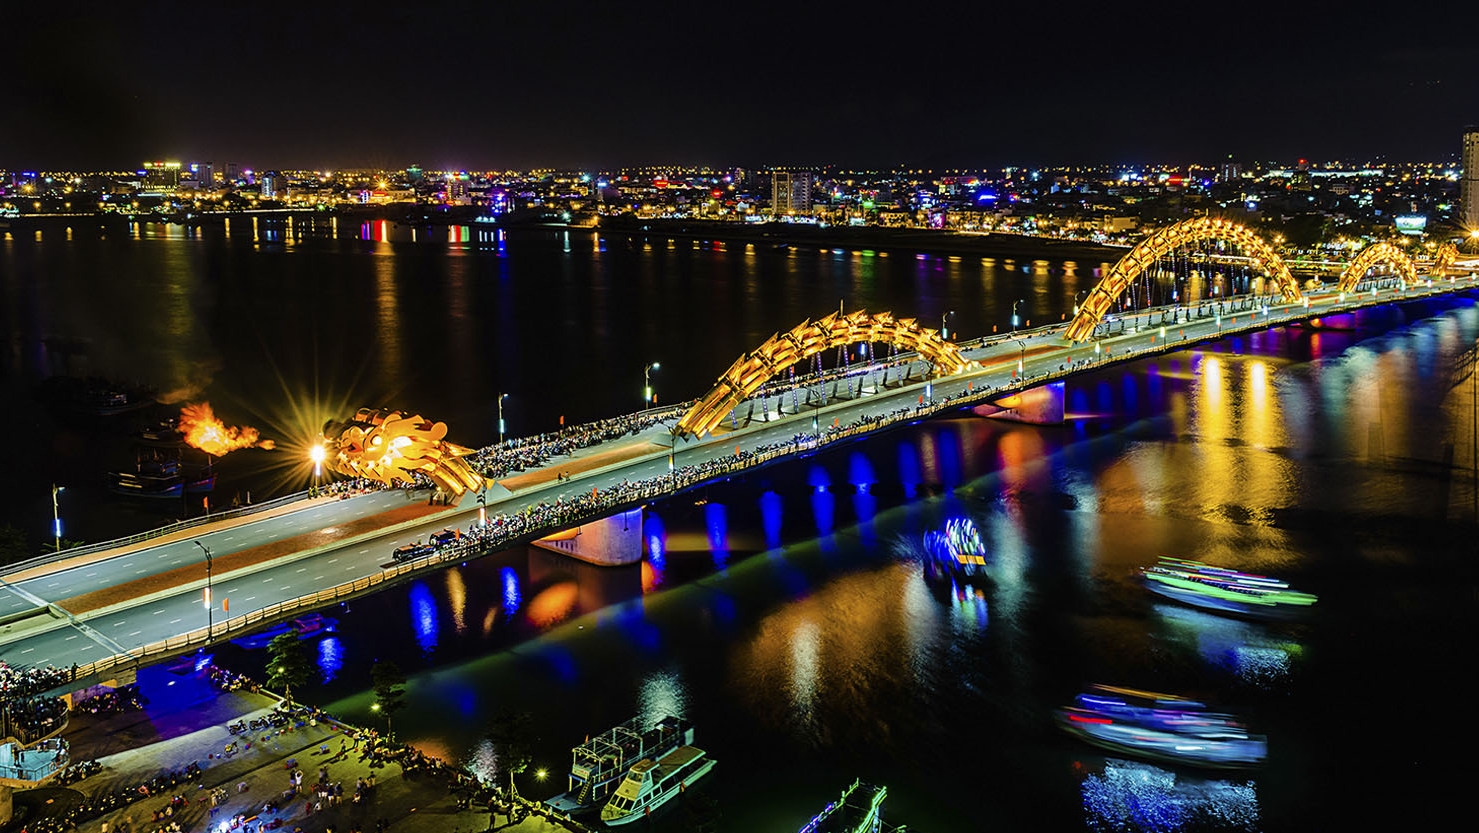 Da Nang named one of 52 places to go in 2019 by New York Times